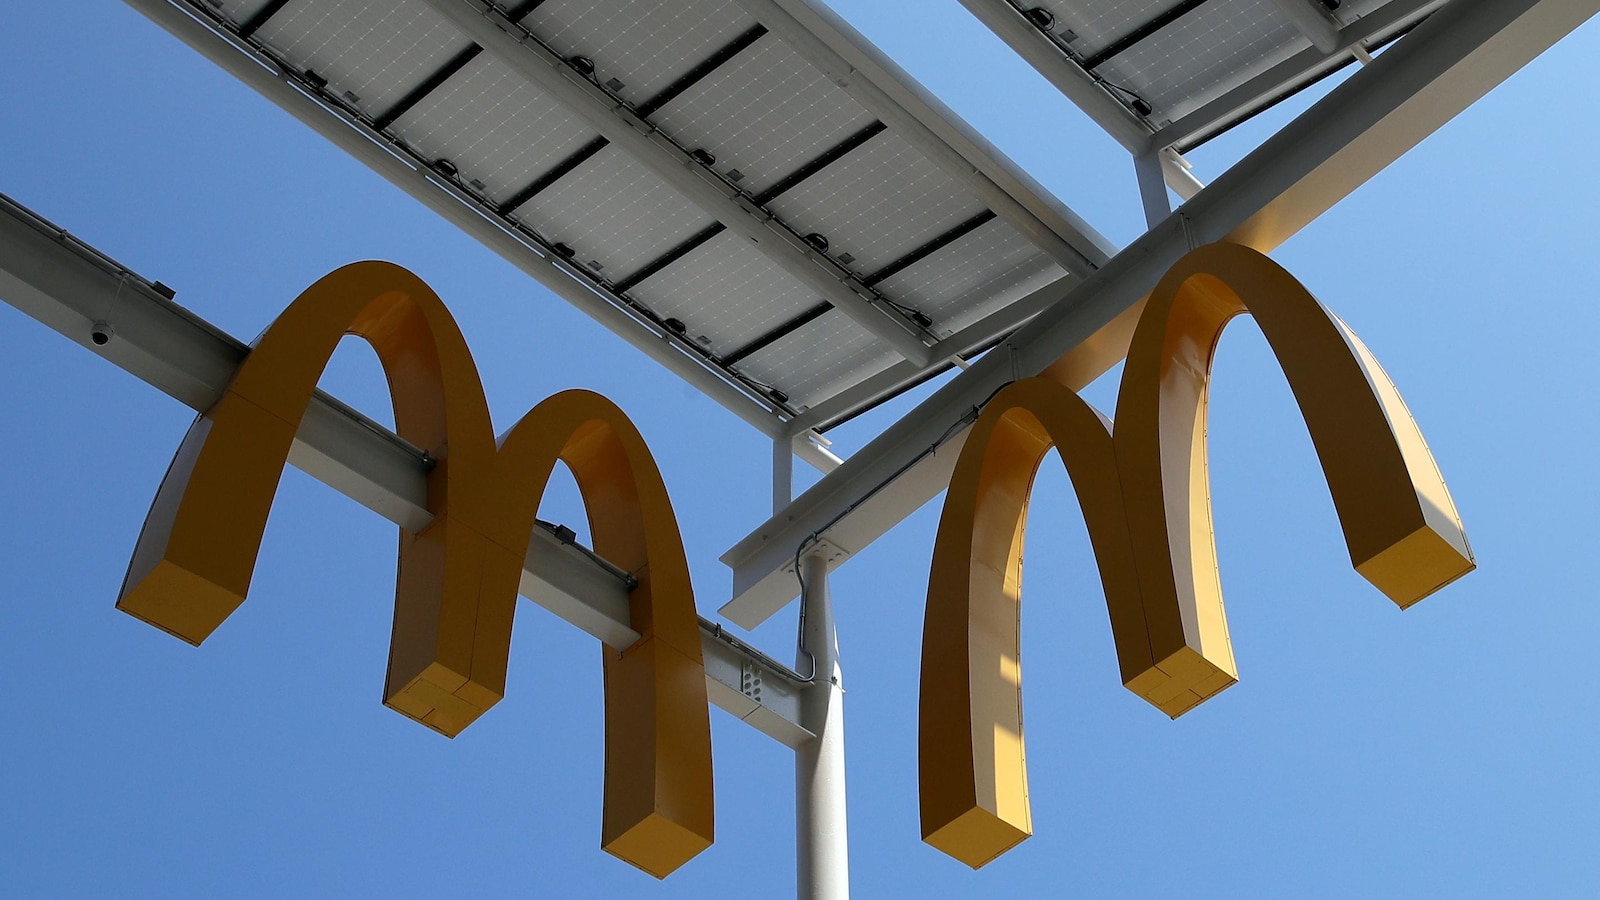 McDonald's franchisee to pay $4.4M settlement following sexual assault of a teenager by manager